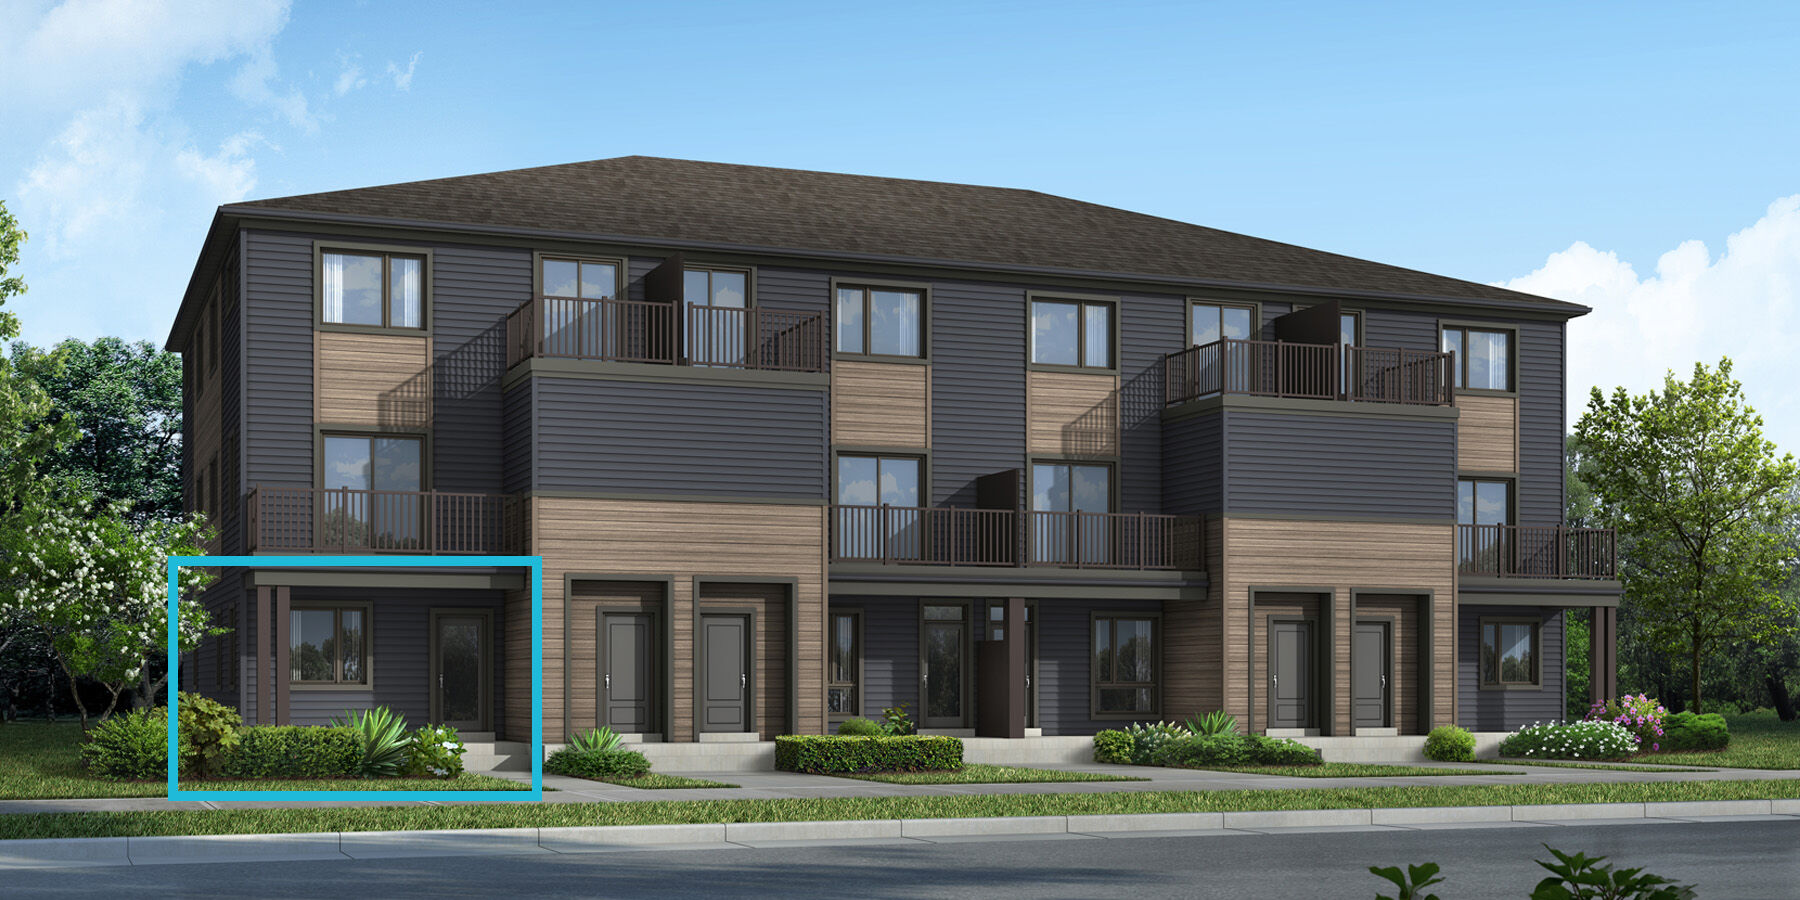 Locale BST4 Boxwood End Transitional Elevation Rendering